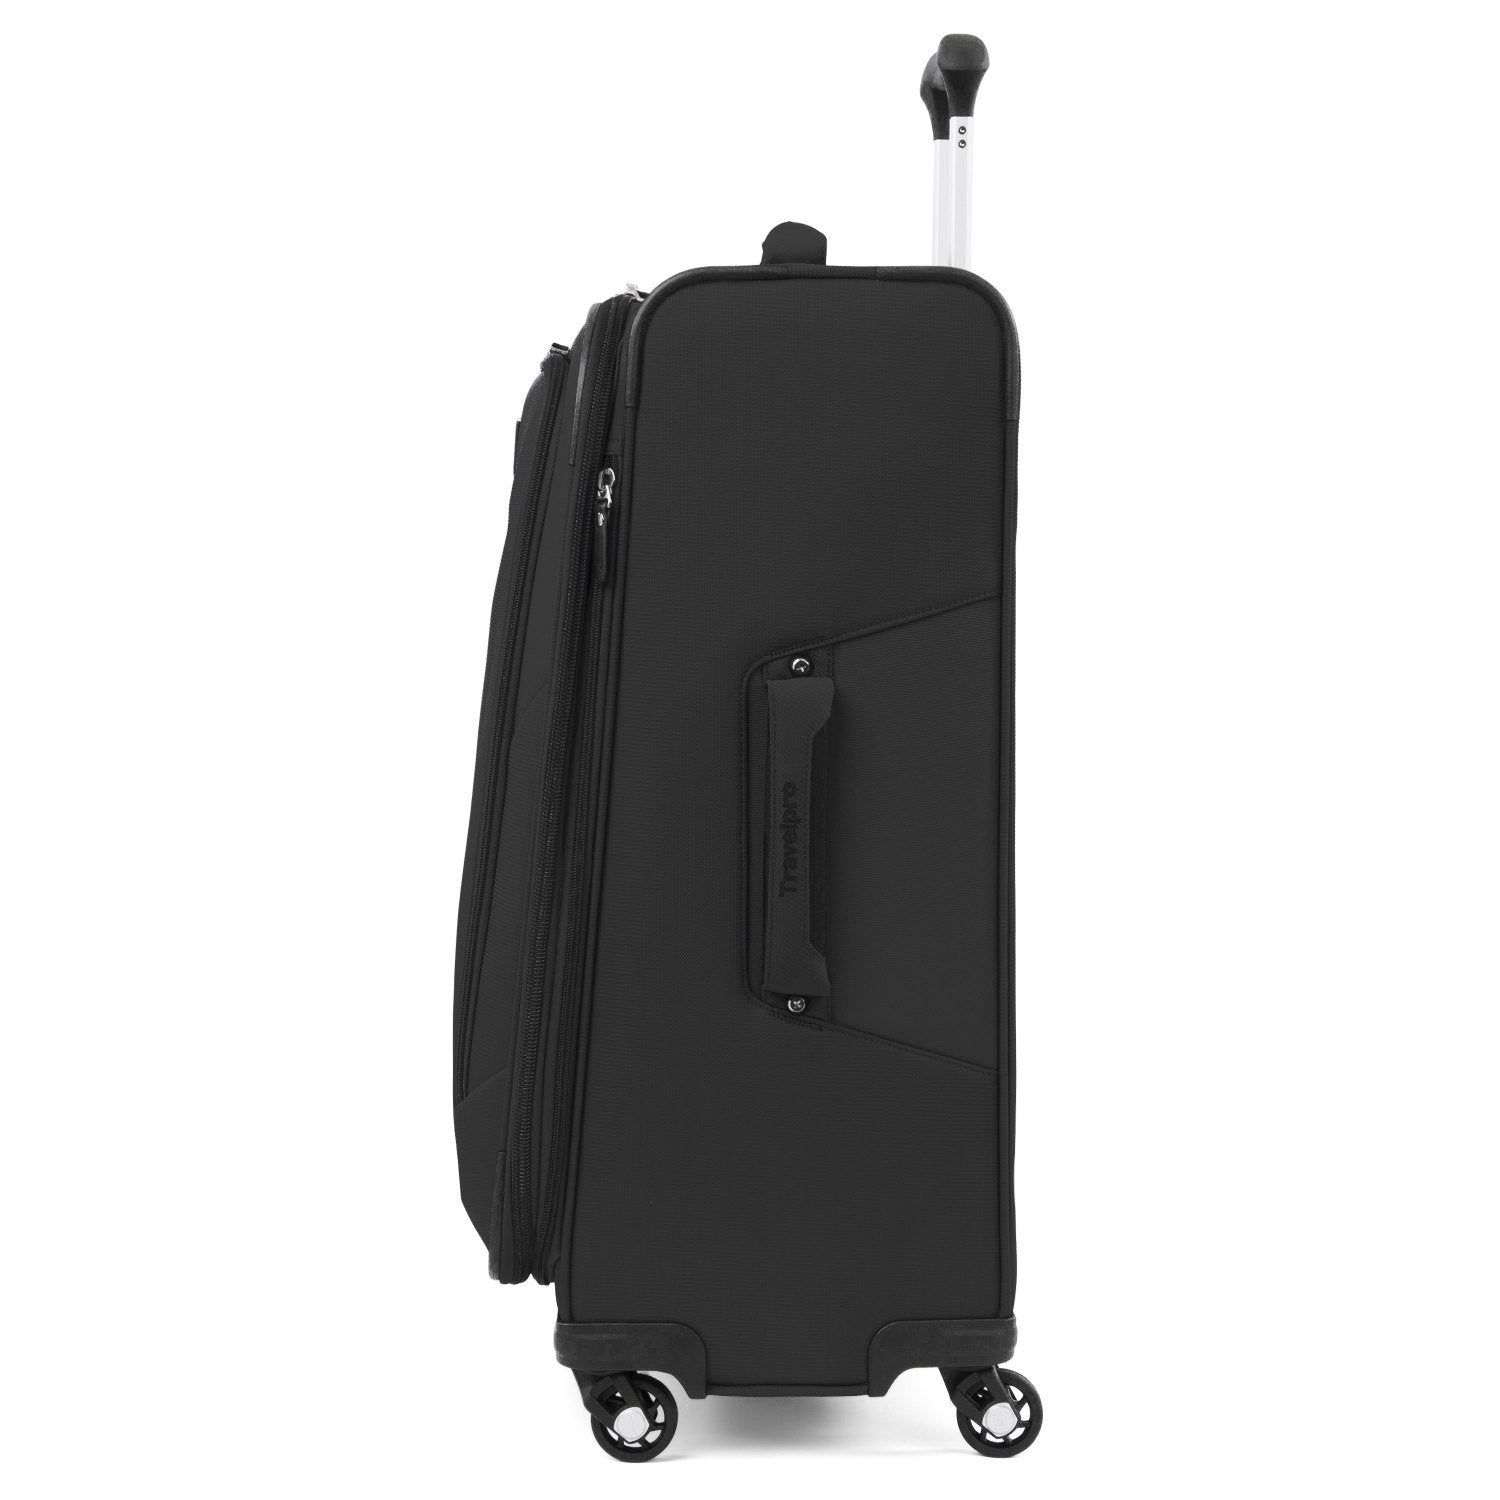 Travelpro Maxlite 5 25 Inch Expandable Spinner Luggage